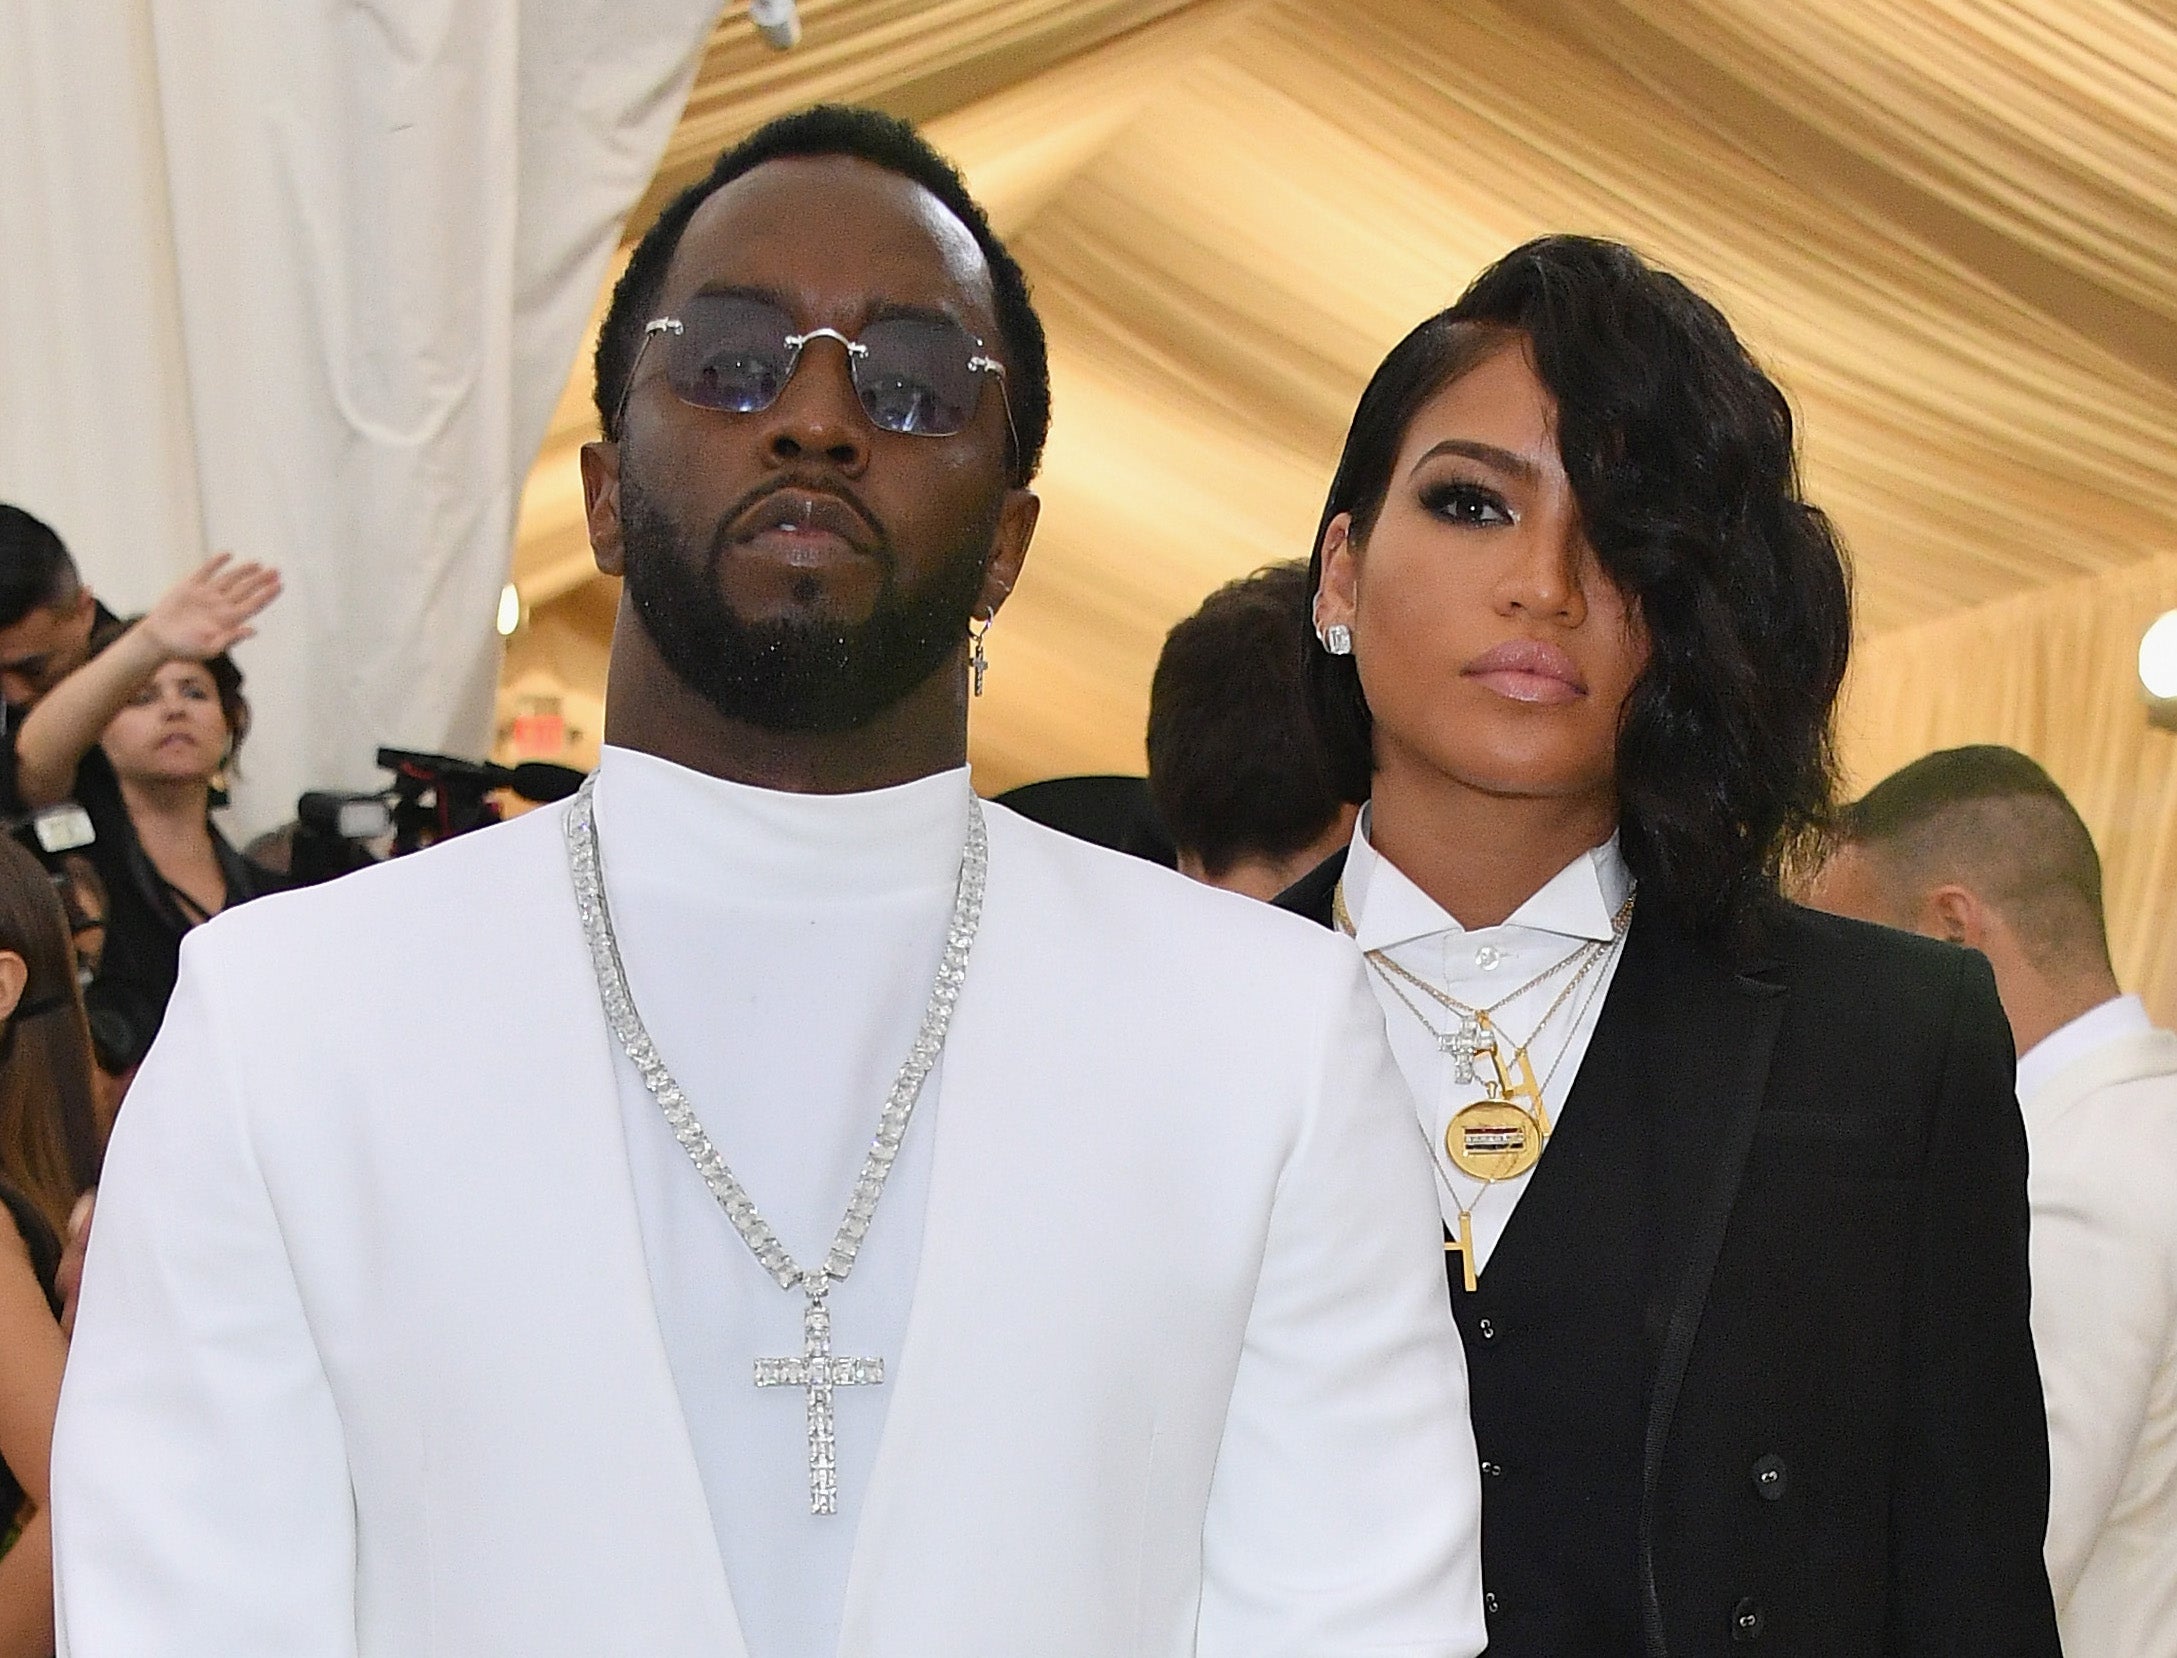 Video Surfaces of Sean 'Diddy' Combs Physically Assaulting Cassie Ventura